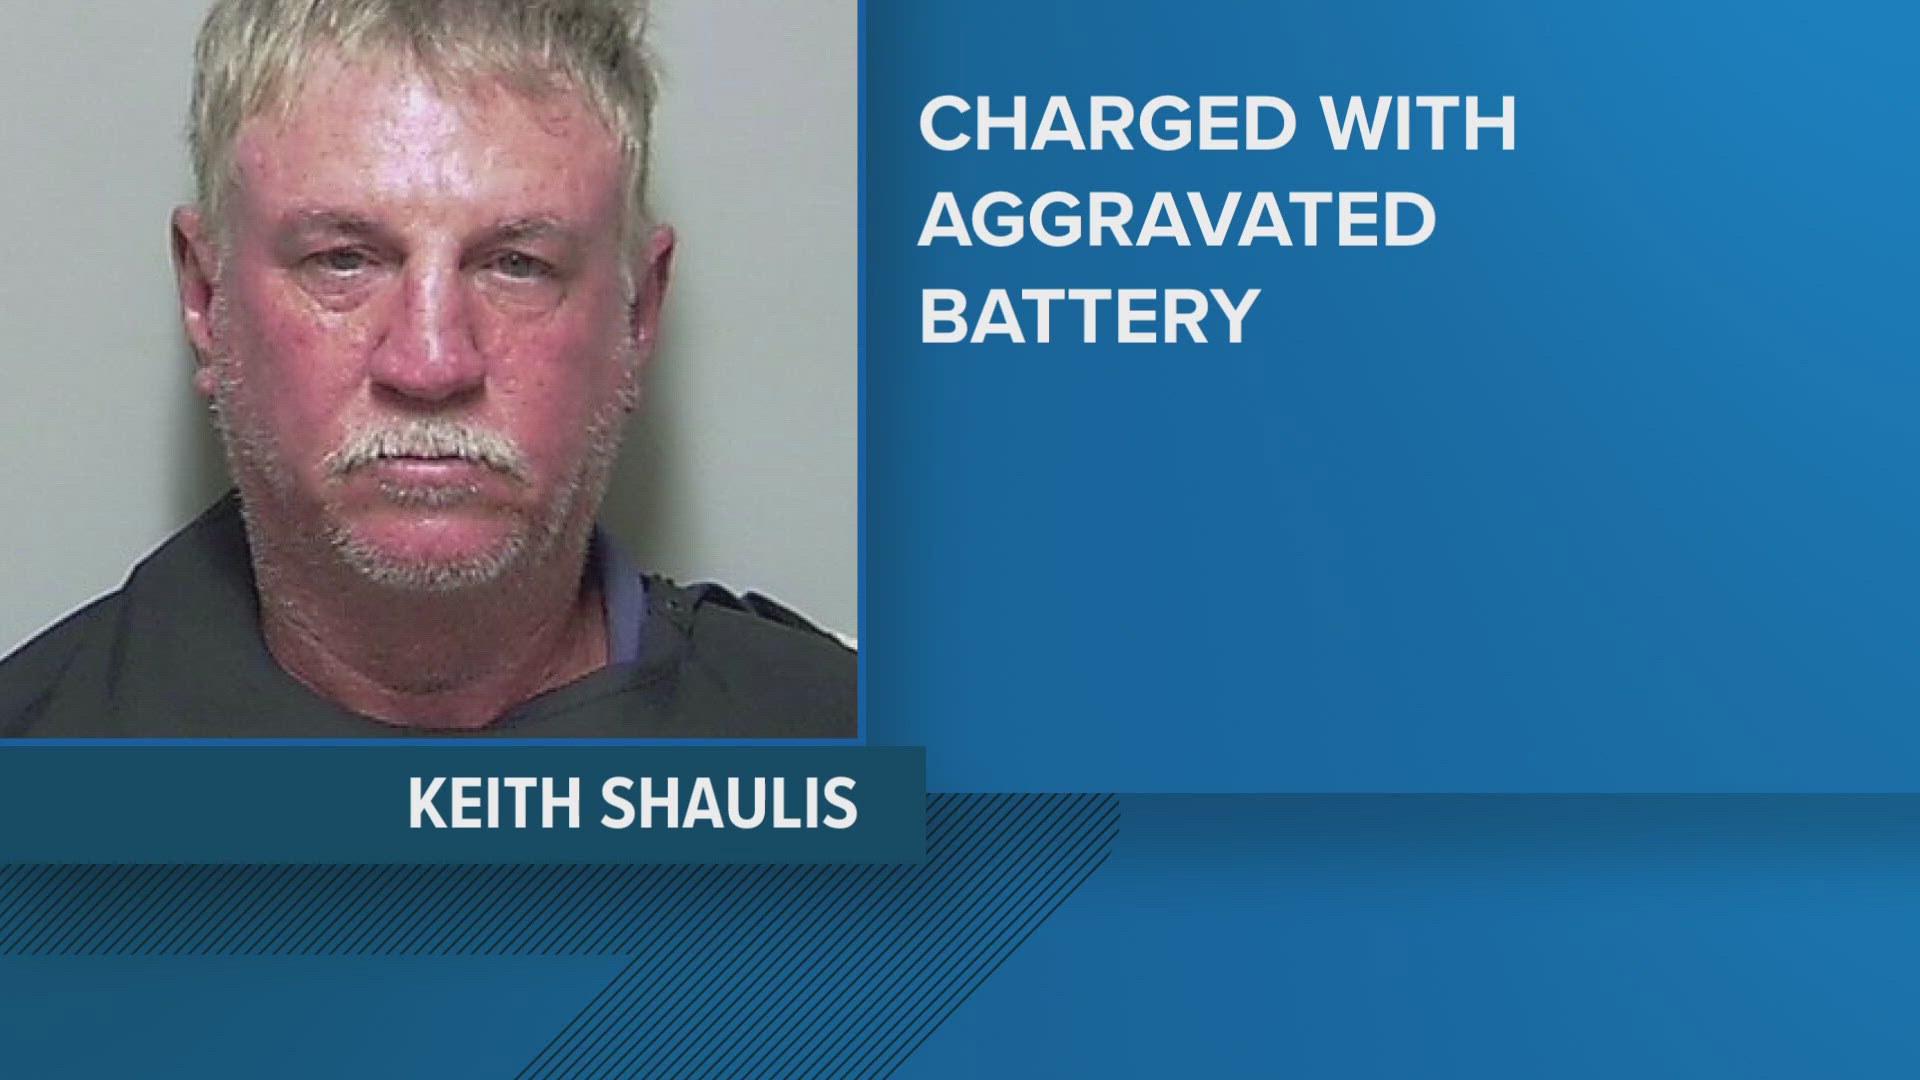 Keith Shaulis was accused of shooting at woman in Pomona Park Tuesday.